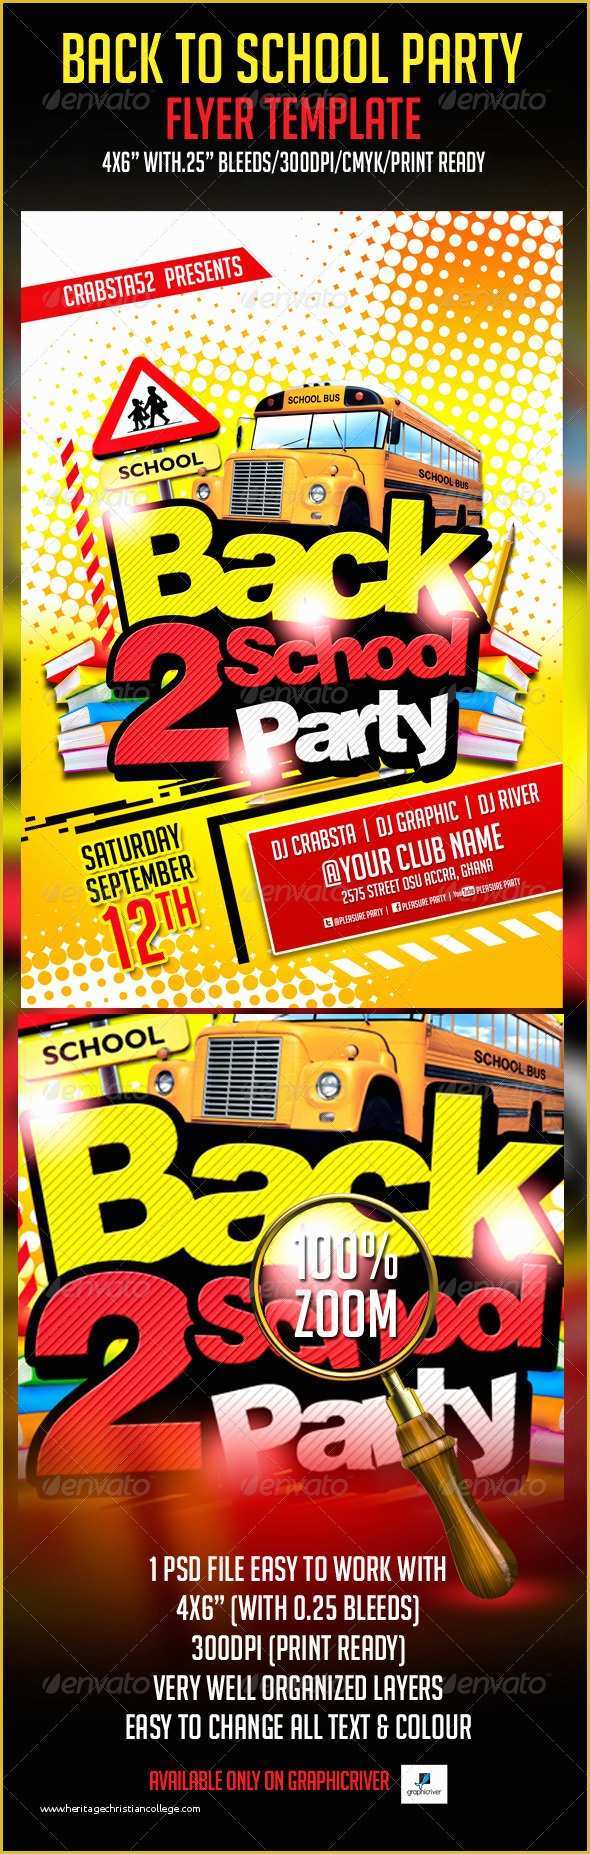 Back to School Party Flyer Template Free Of Back to School Party Flyer Template by Crabsta52